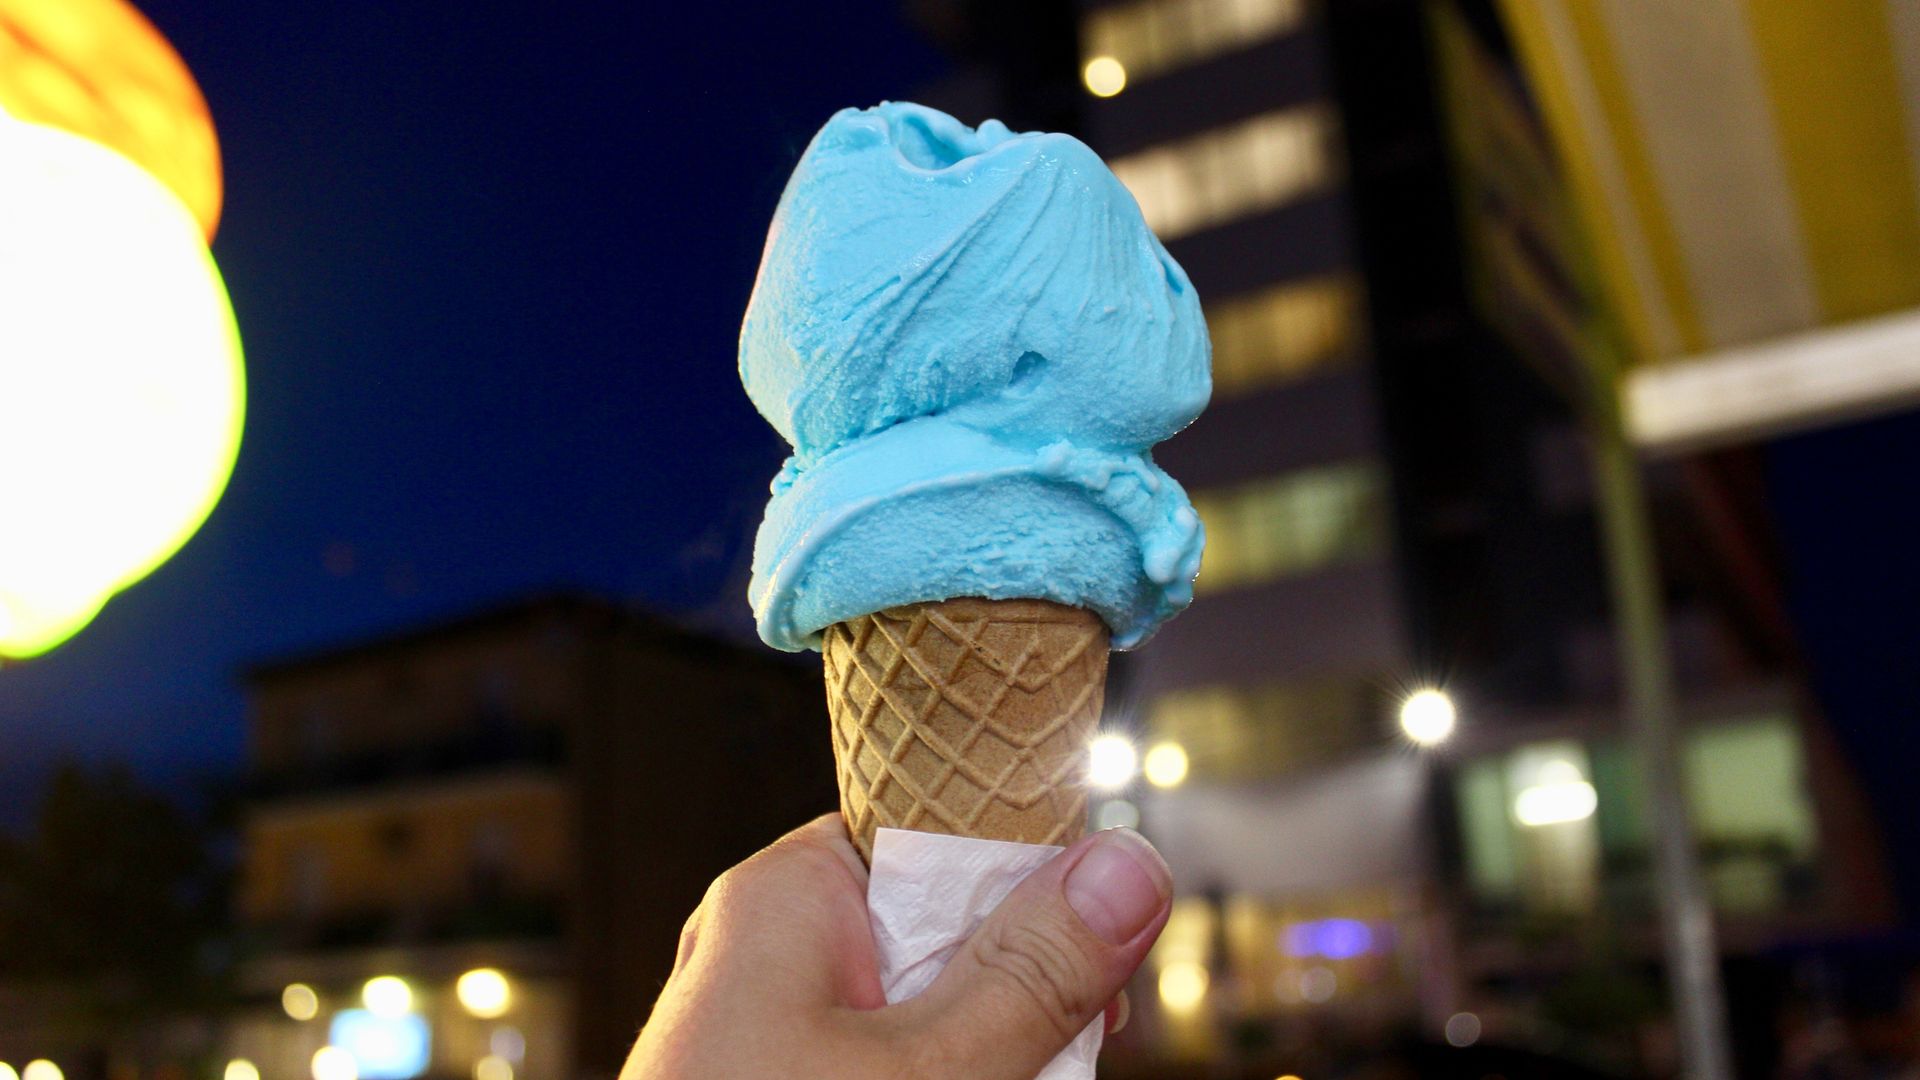 Italian city backtracks on plans to ban ice cream after midnight